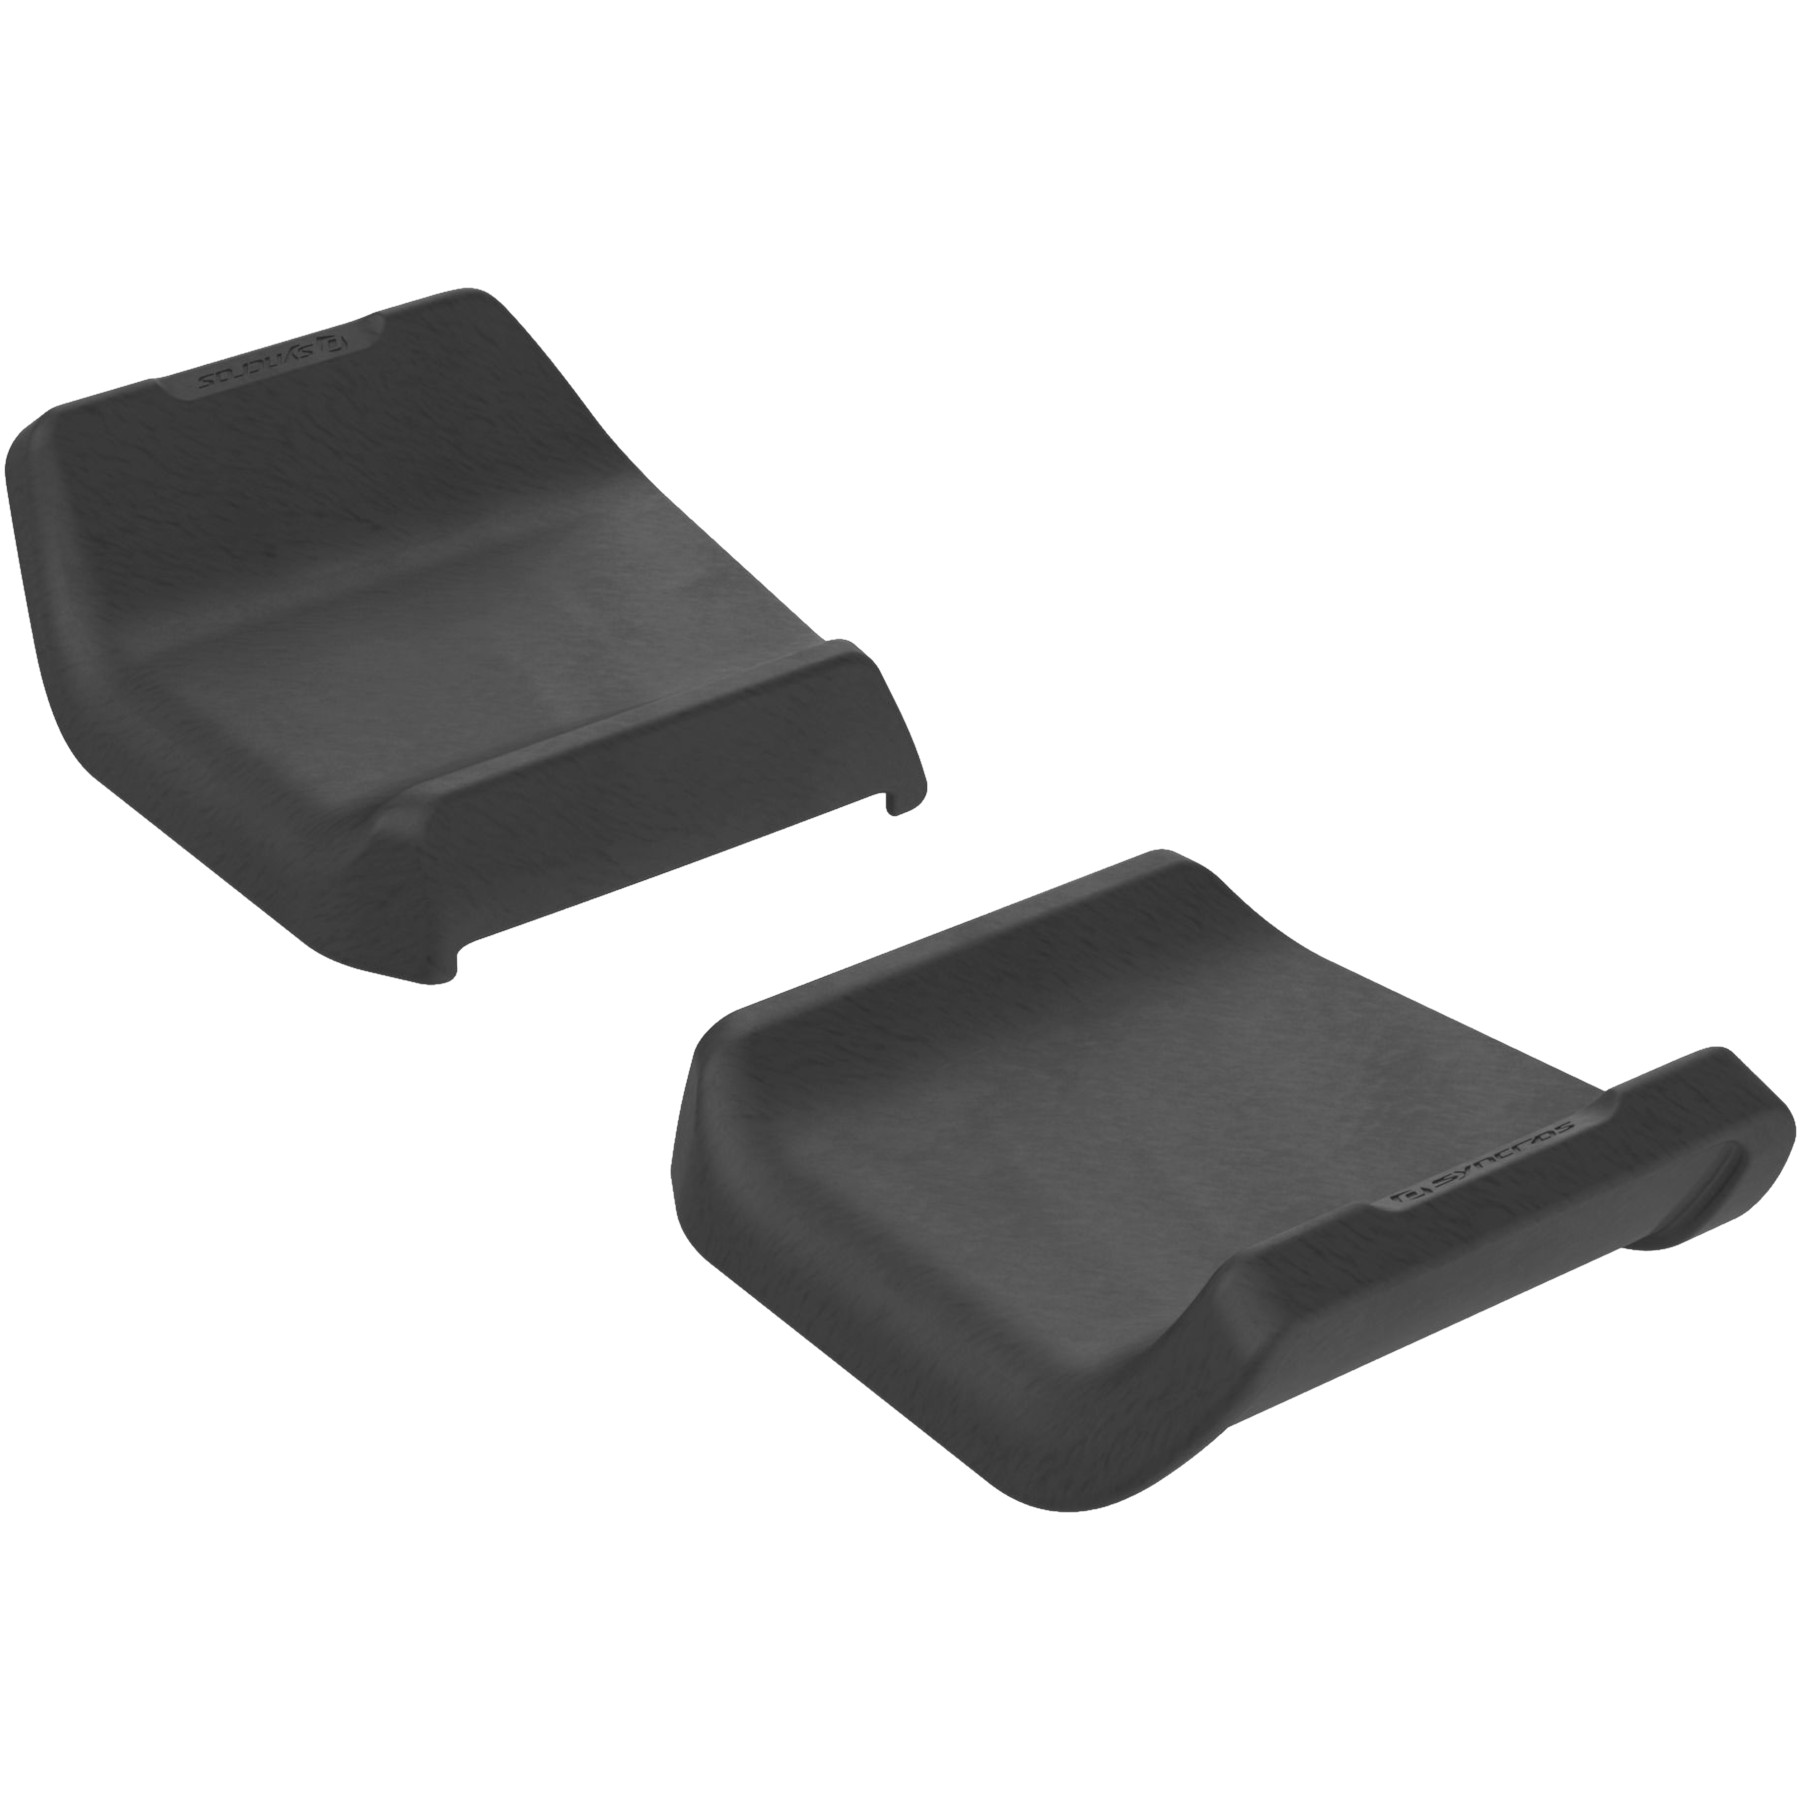 Picture of Syncros Armrest Pads for Scott Plasma 6 - black